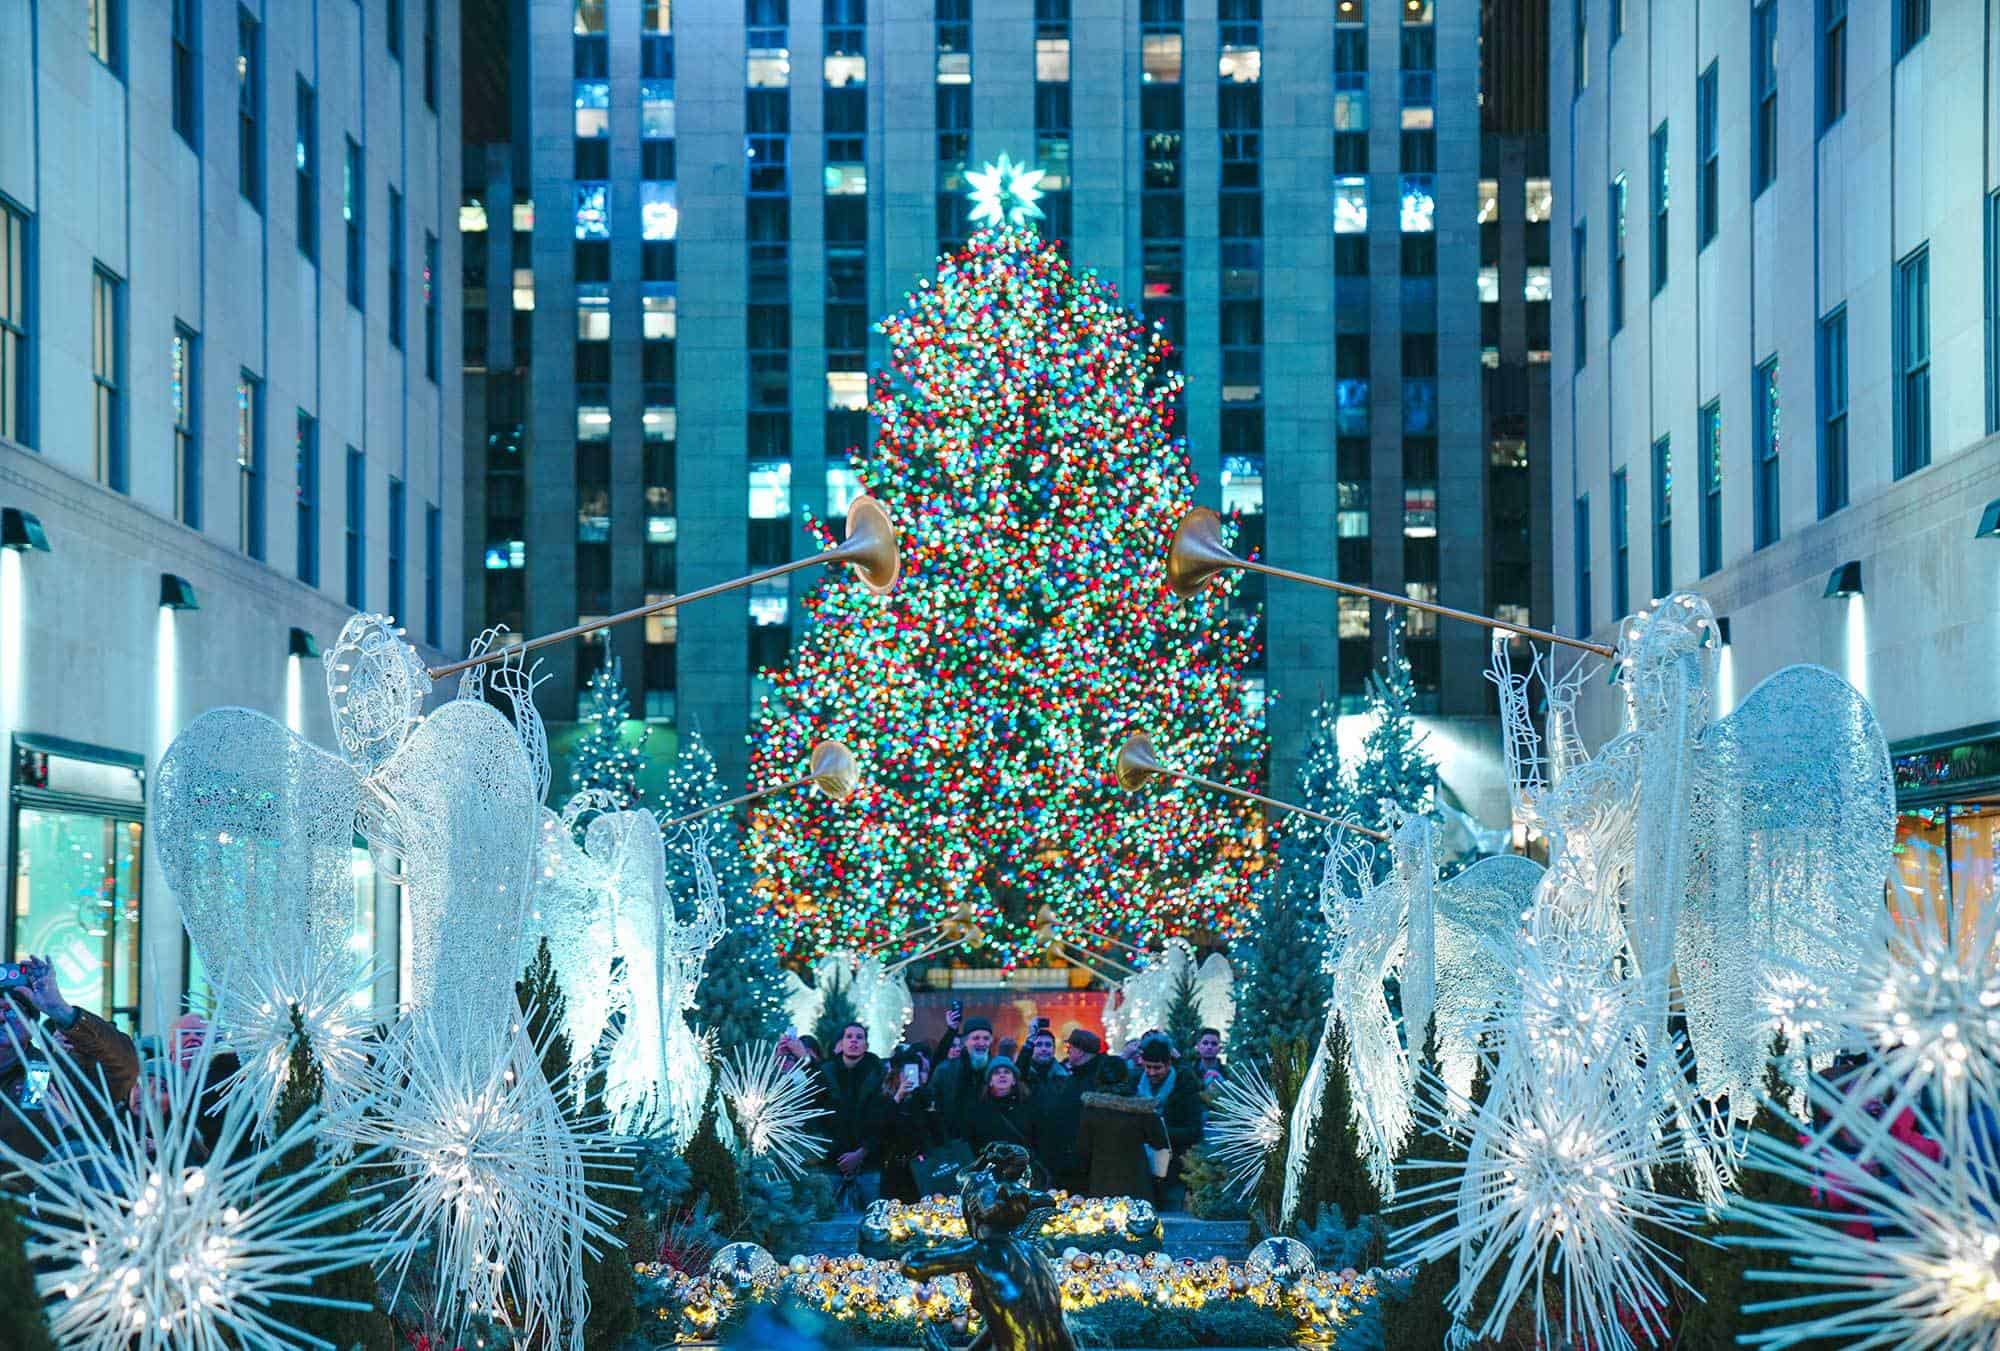 The best holiday displays in New York City